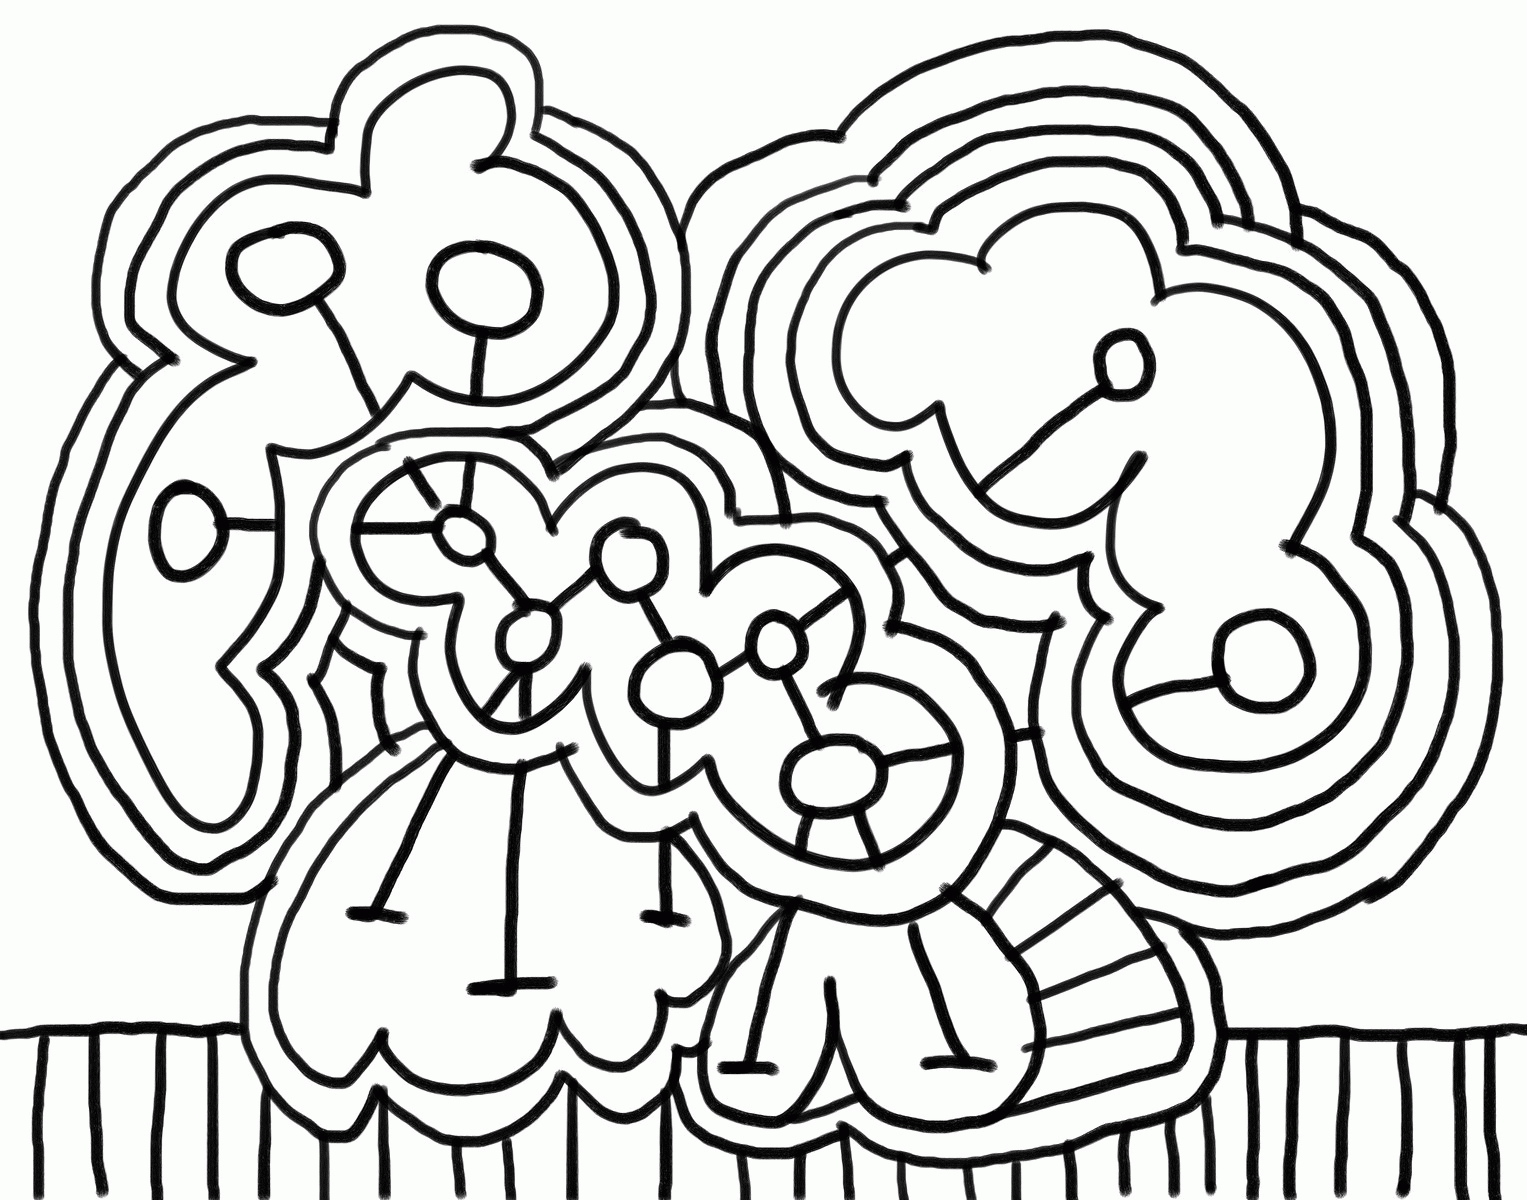 Lines Turn Your Drawings And Pictures Into Online Coloring Pages ...